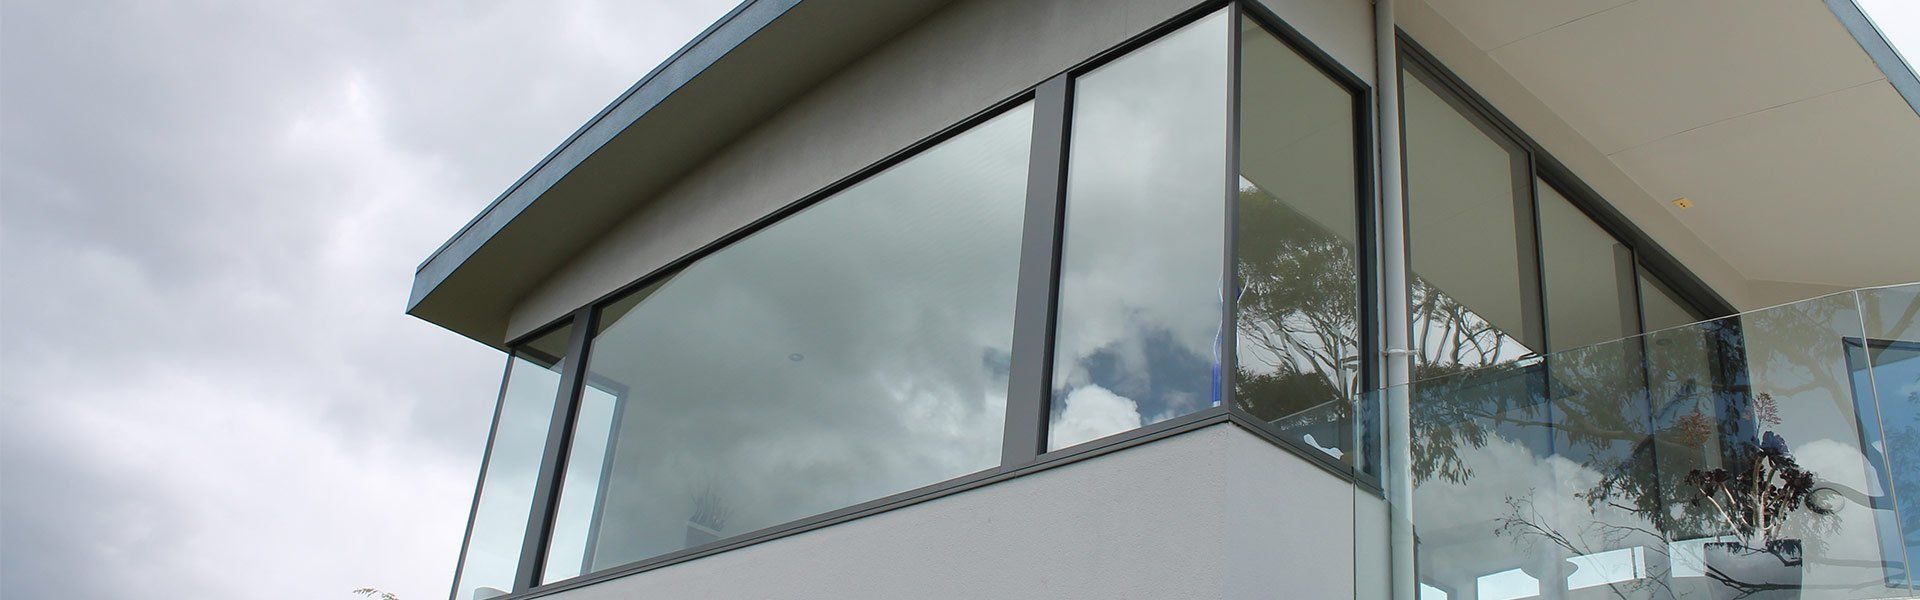 home balcony window and support on glass